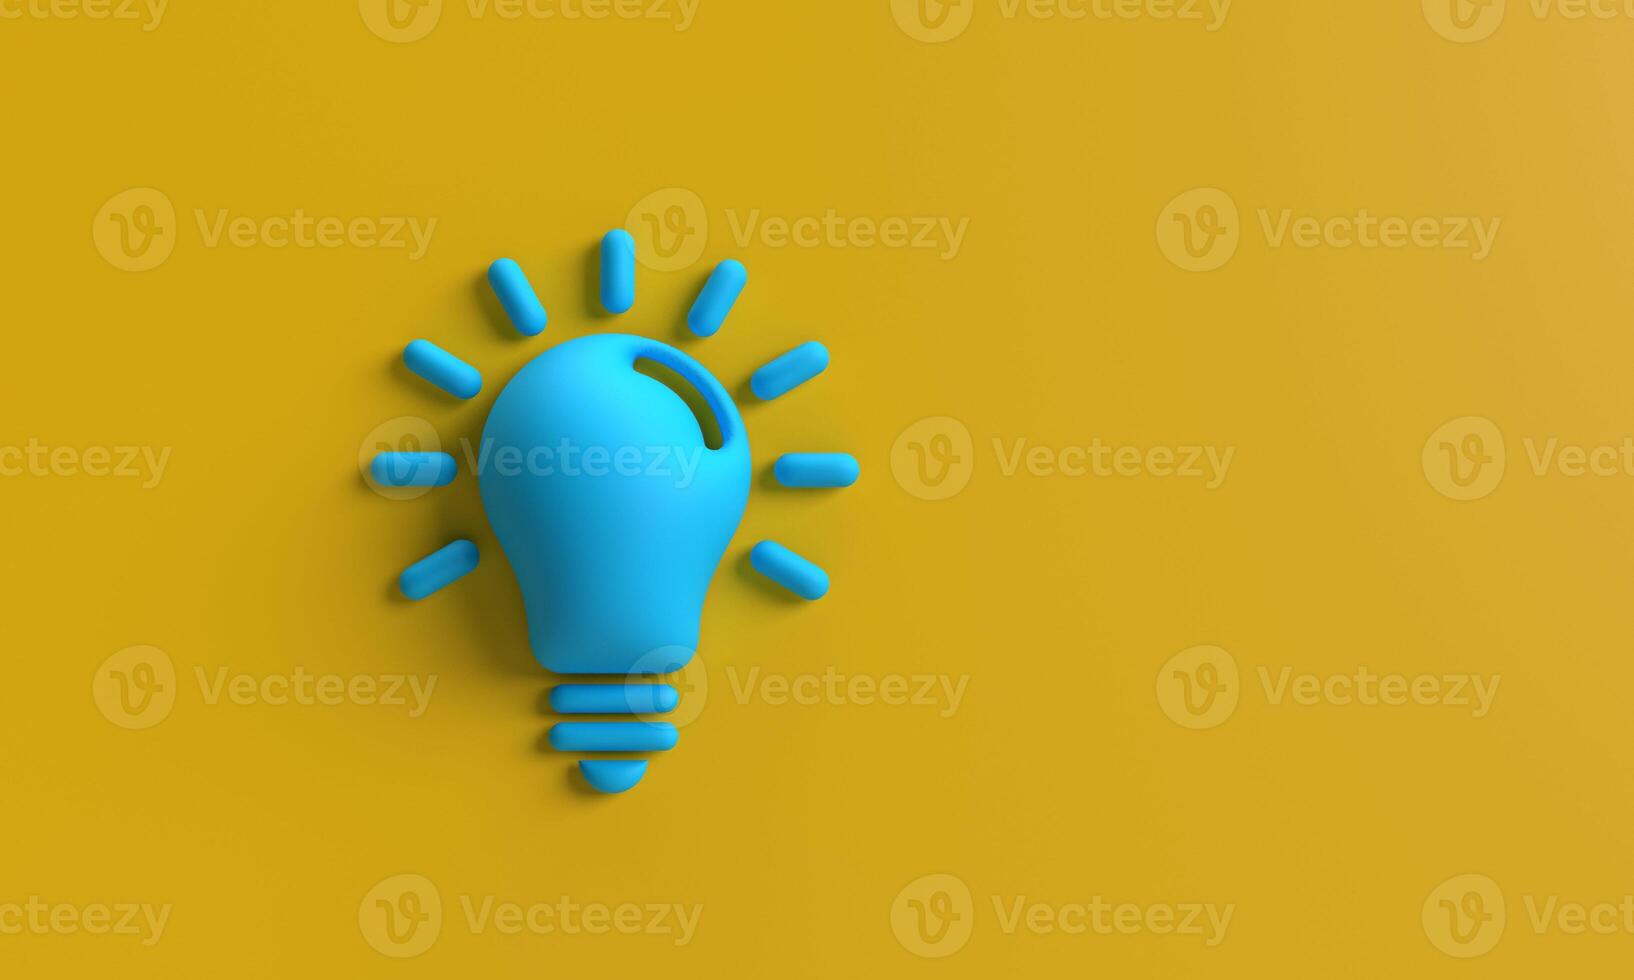 lamp lightbulb blue yellow color background wallpaper copy space creative idea genius education study learning bright solution technology energy power imagination business strategy think lighting photo